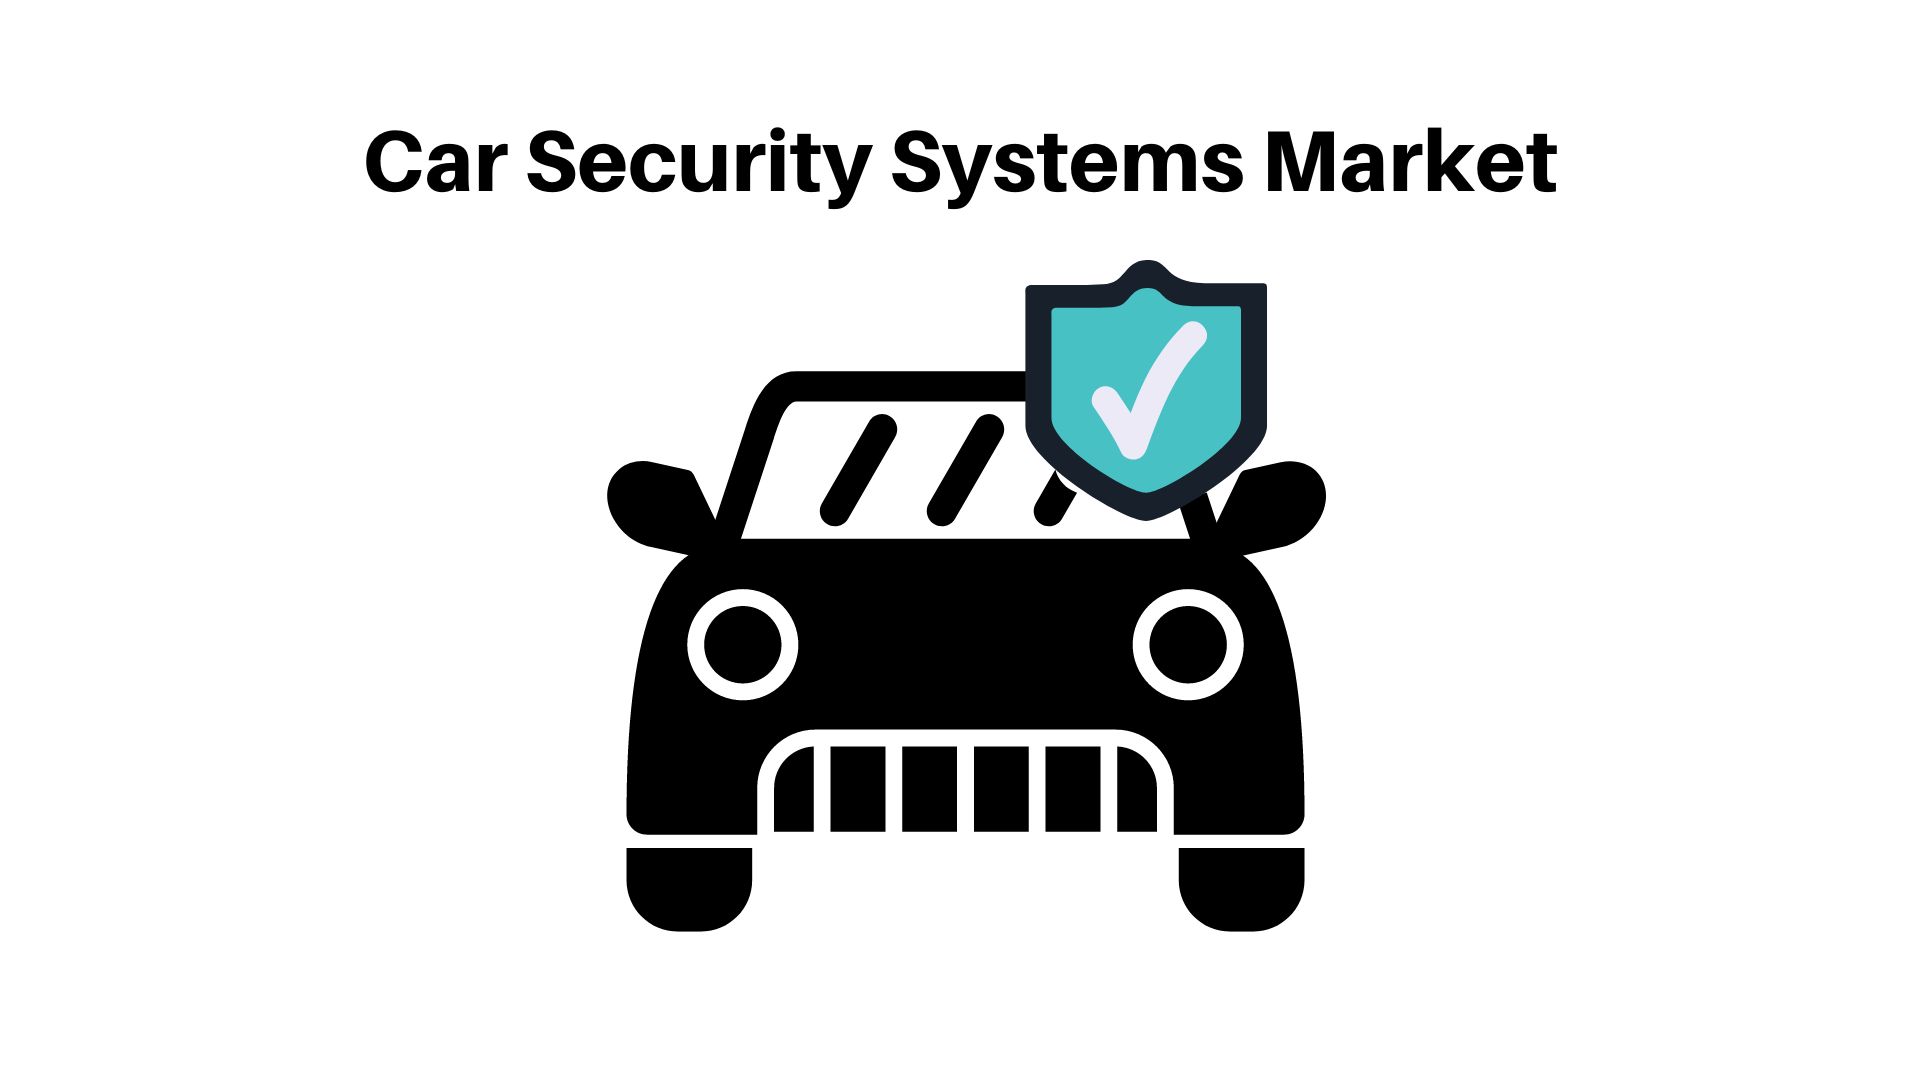 Car Security Systems Market to Reach USD 36.8 Billion by 2032, Says Market.us Research Study